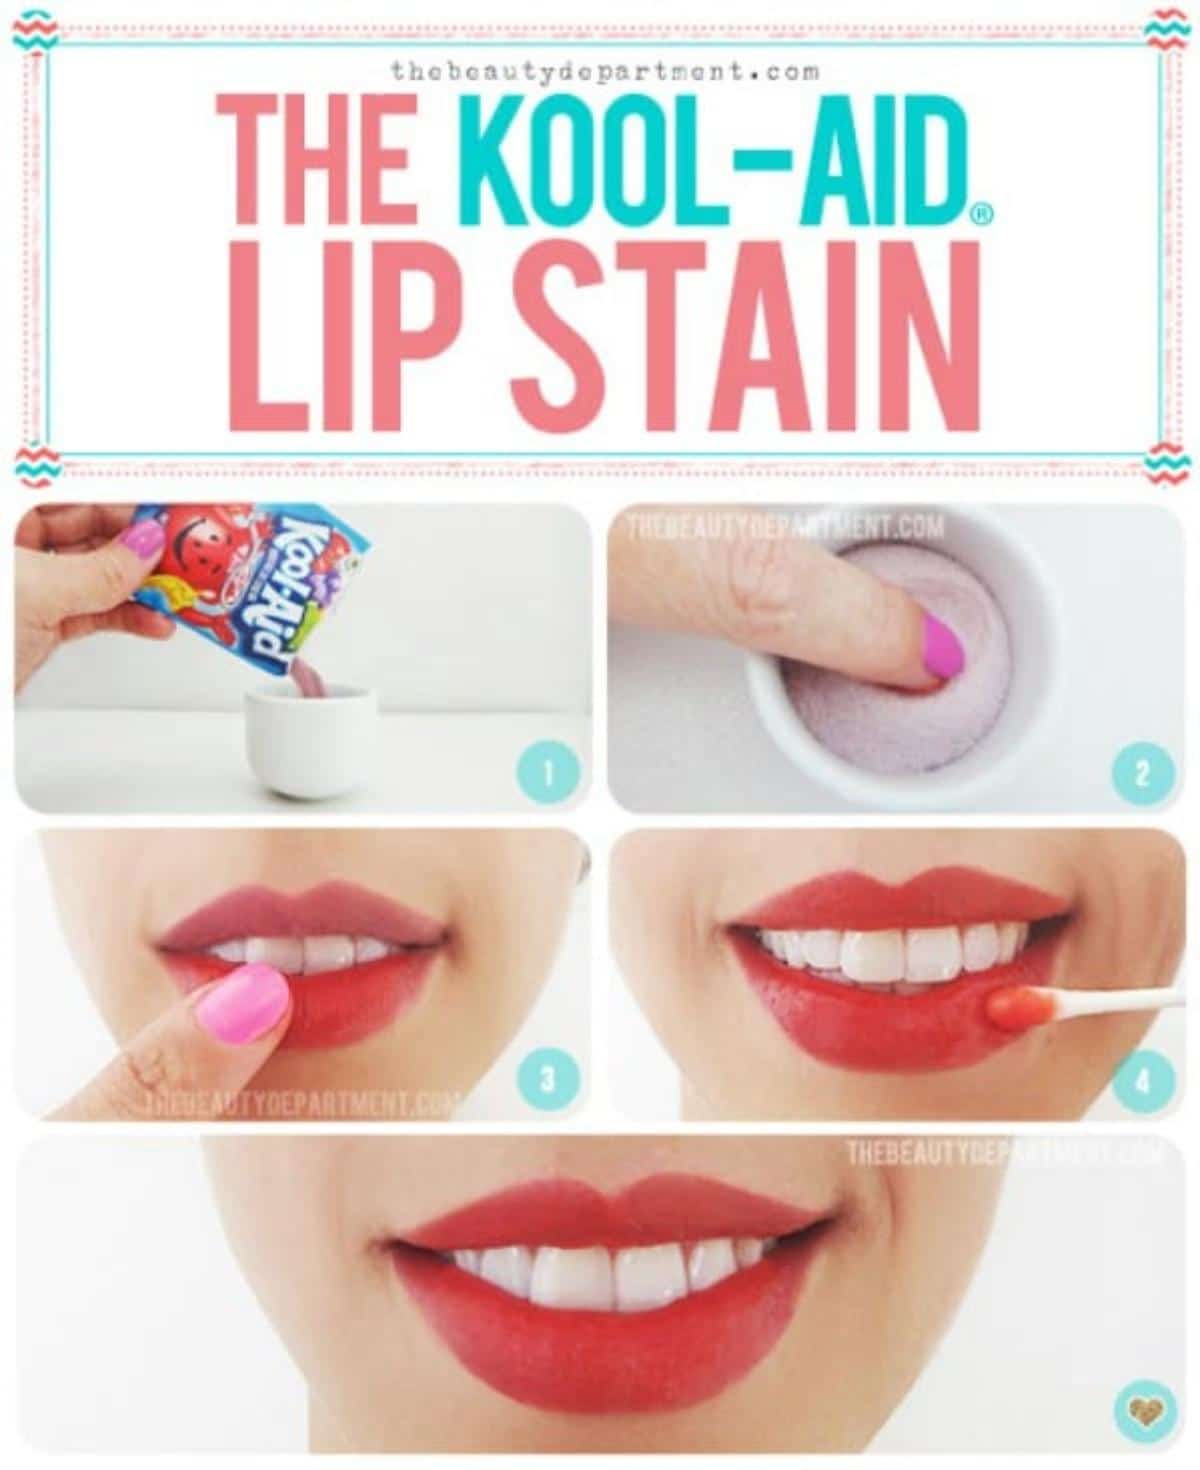 How to Make a Lip Stain from Kool-Aid collage.